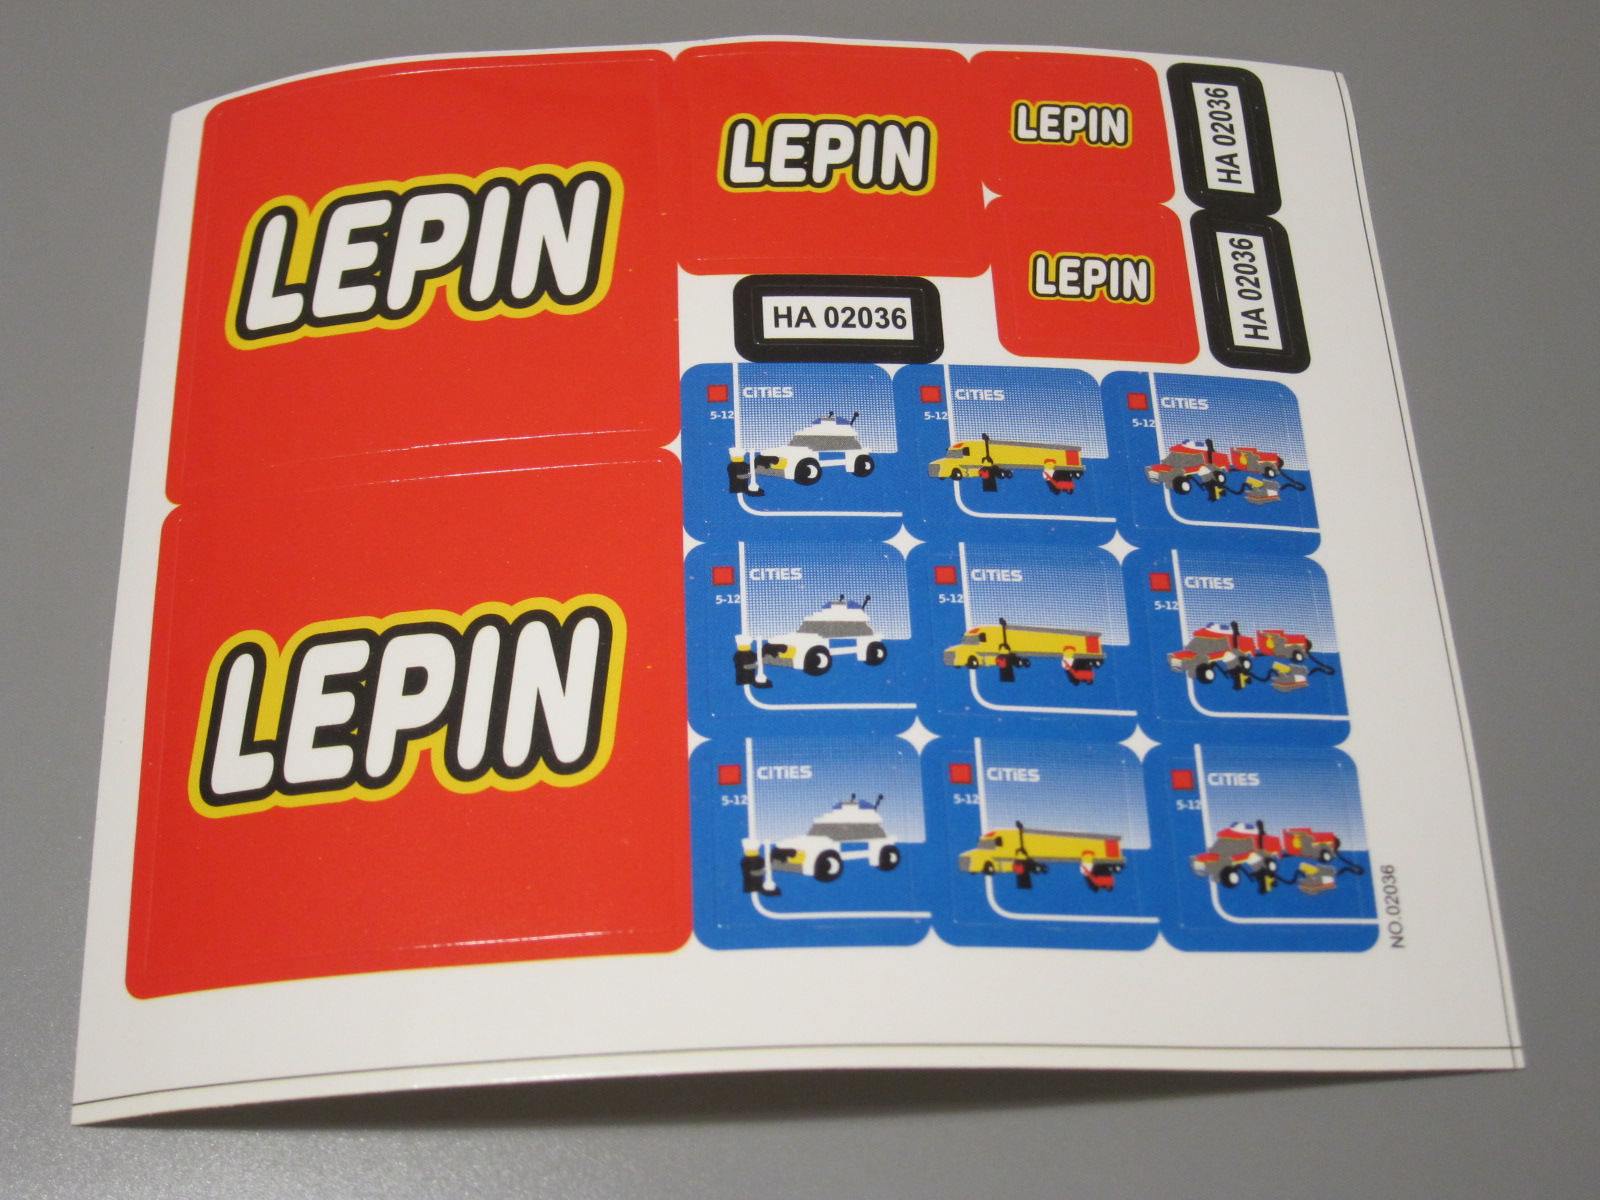 Lepin Reddit - Unveiling The Online Community Of Building Block Enthusiasts